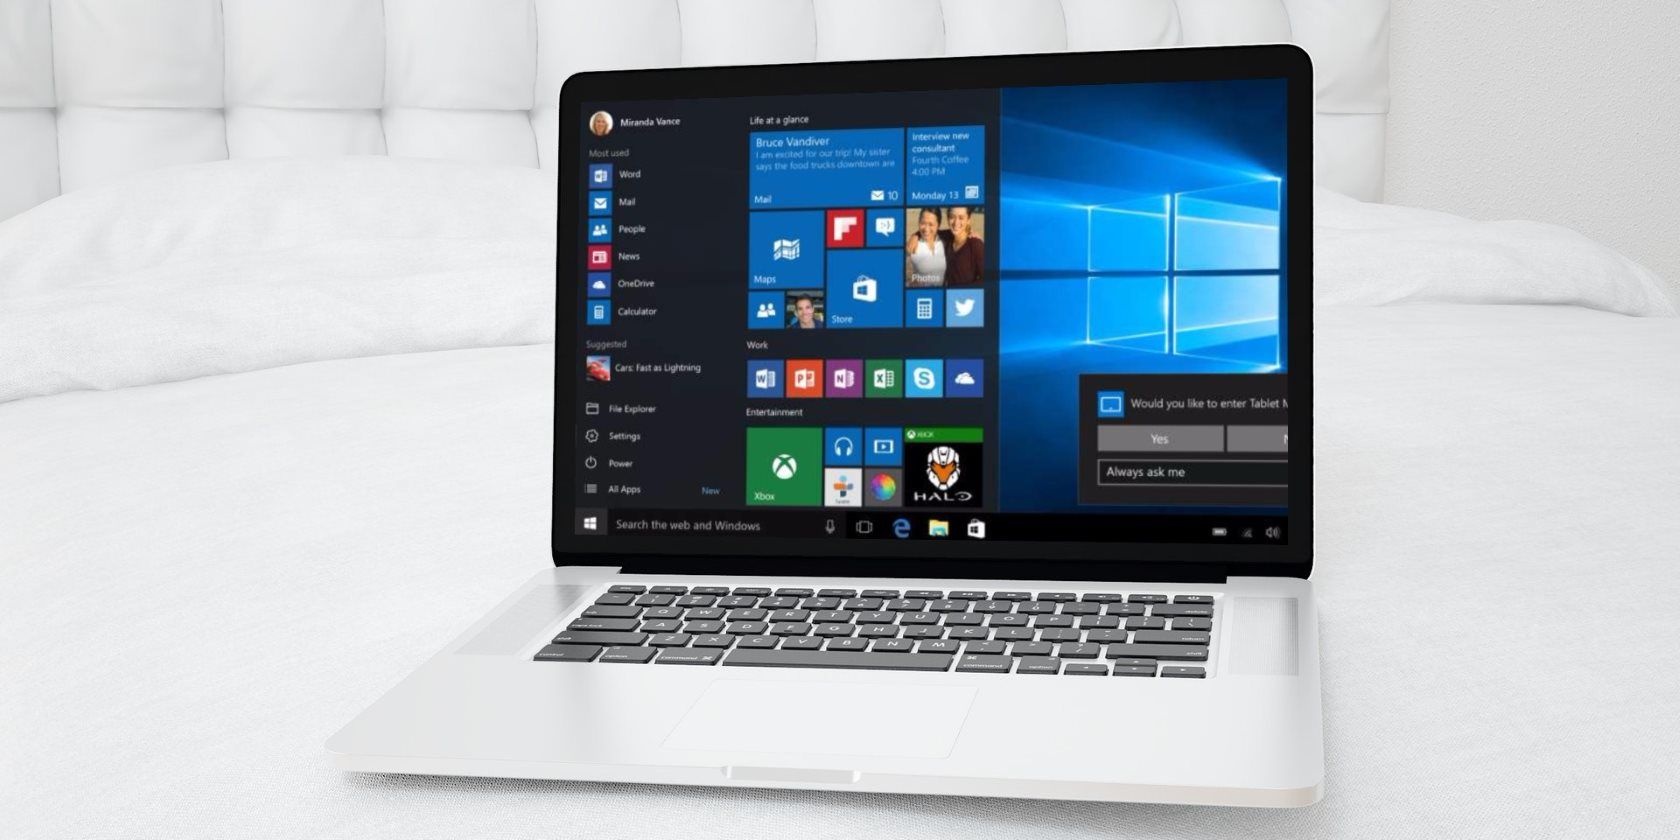 installing windows 10 with usb flash drive on macbook air